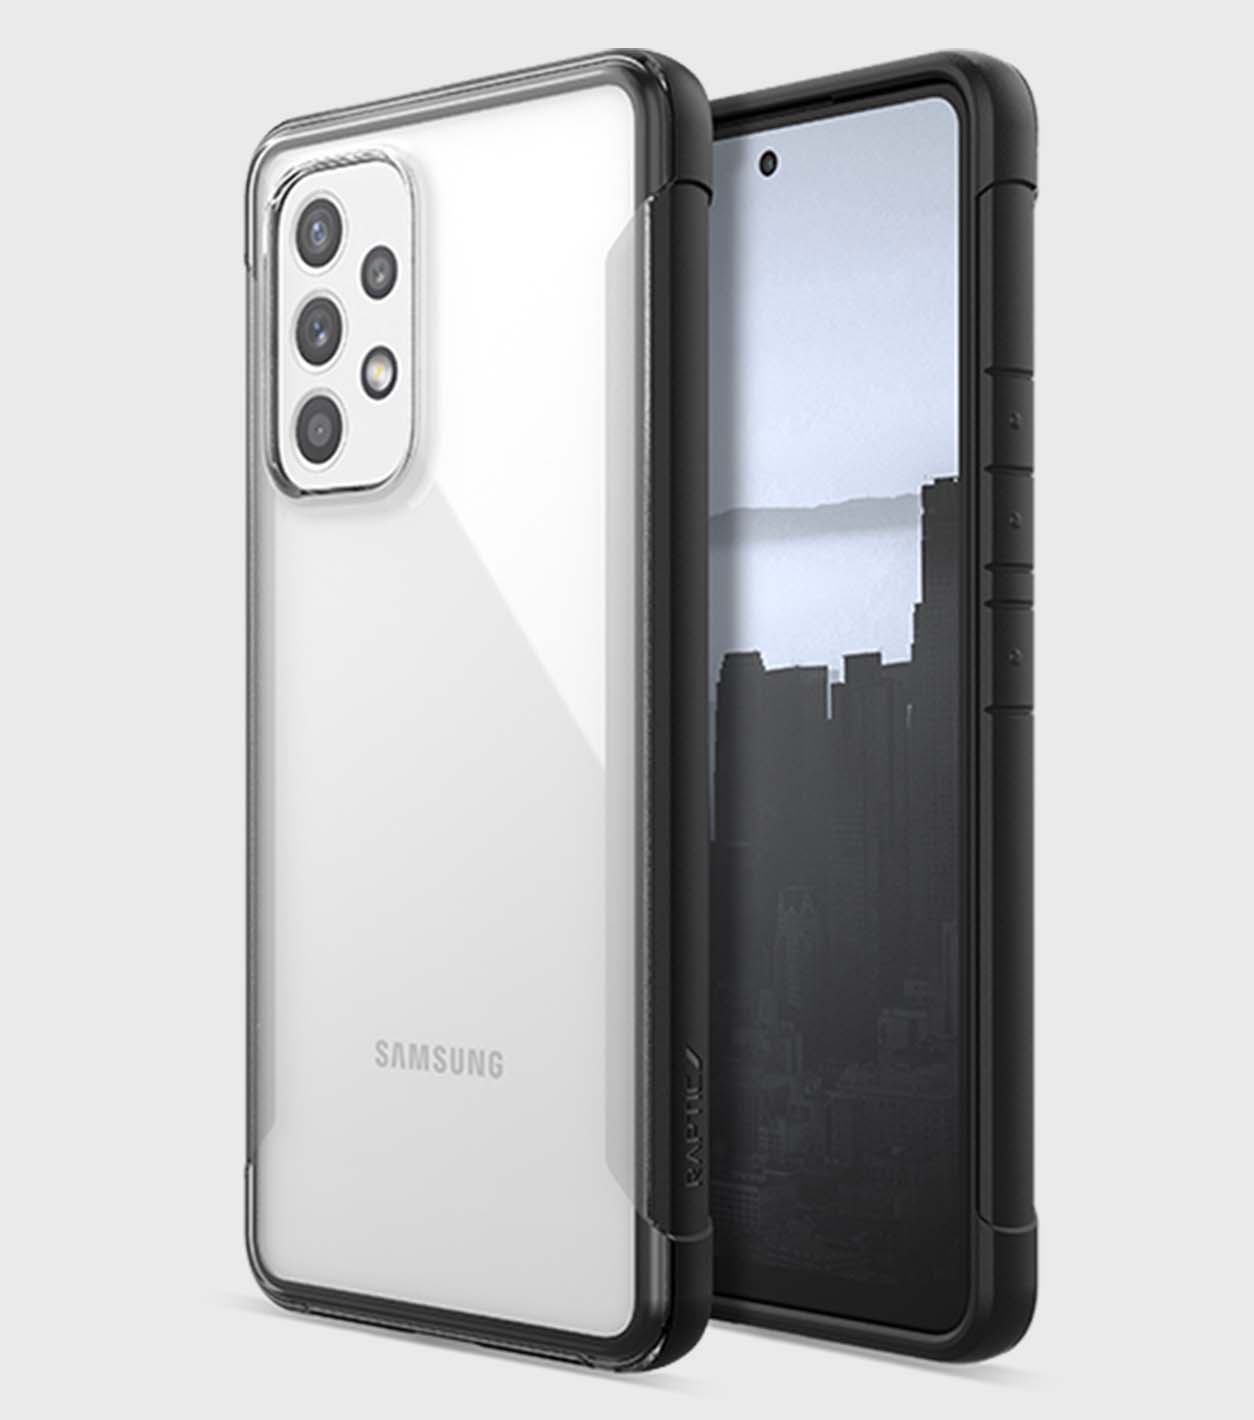 Clear eco-friendly Raptic Earth case on a Samsung Galaxy A53 smartphone with multiple camera lenses.